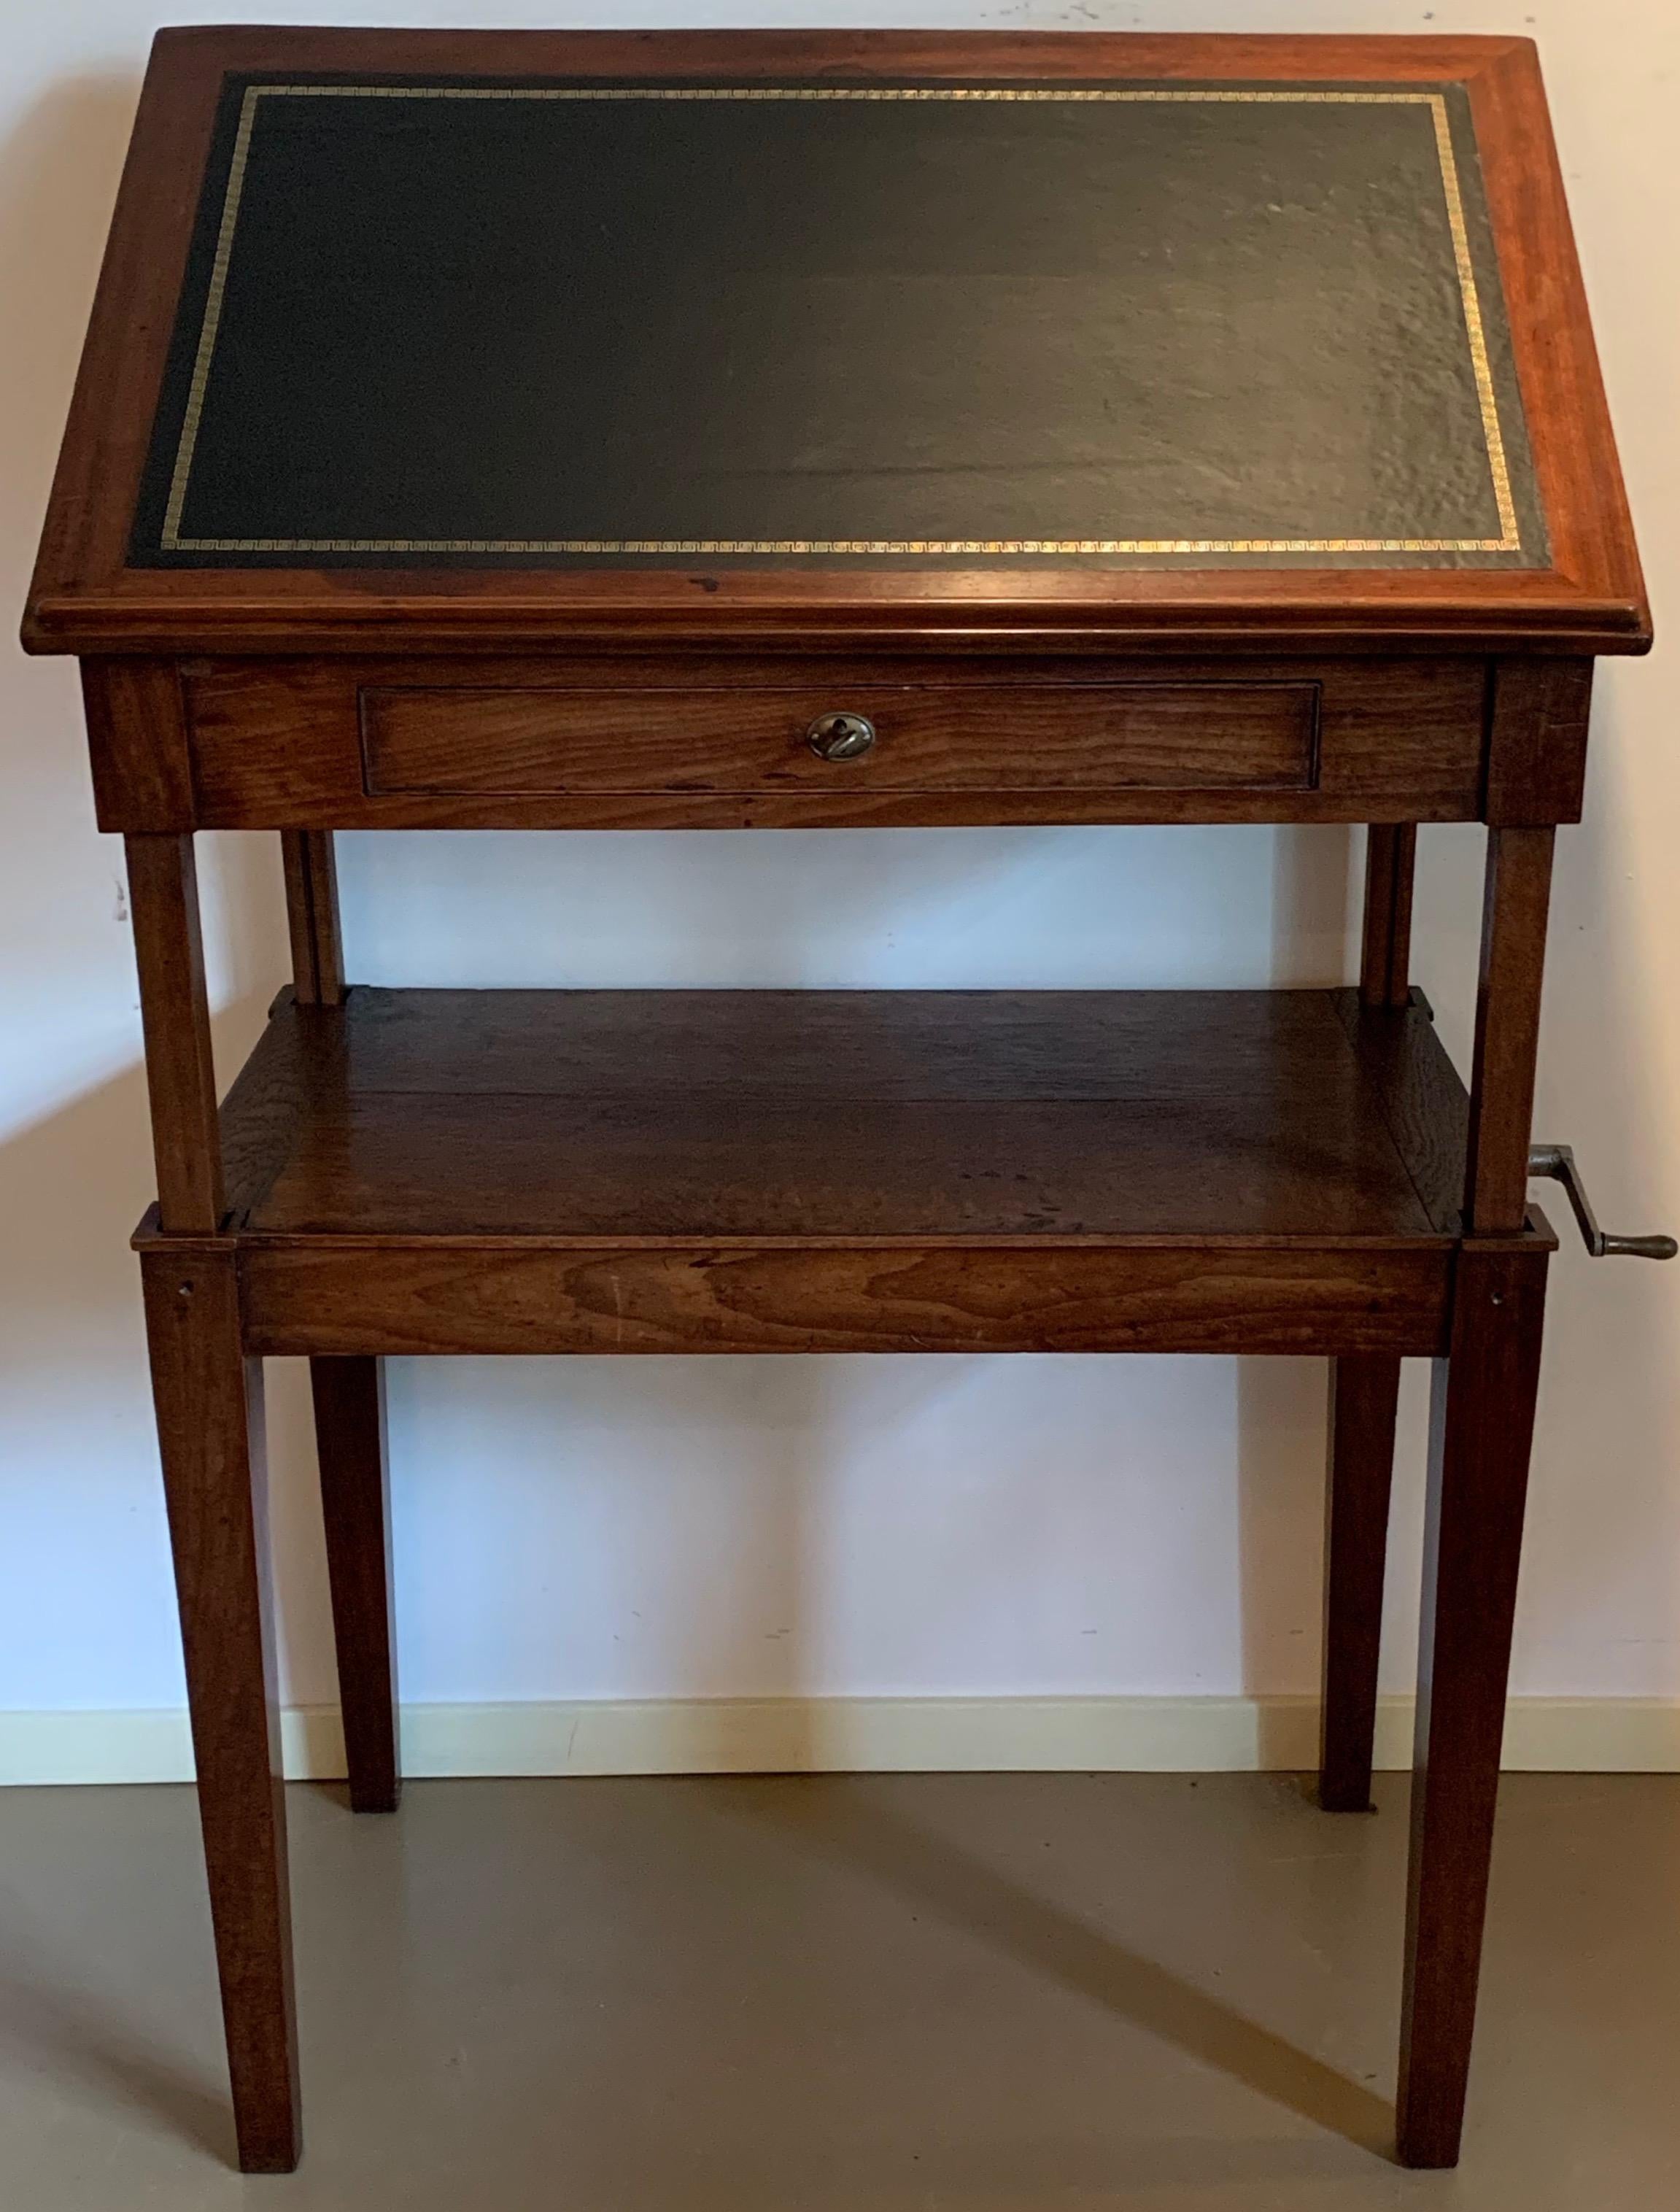 A late 18th century English architect's drawing table / desk of mahogany. The legs and extendable parts of oak. The green leather writing/working surface adjusts to various angles. The table is height adjustable from 67cm to 100cm.

